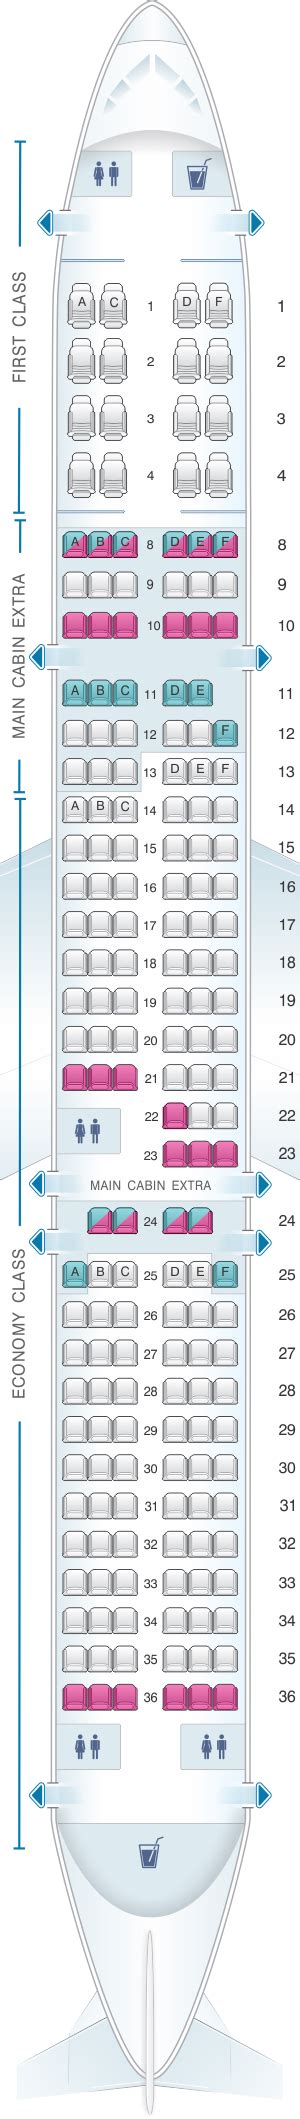 United Airbus A Seat Map